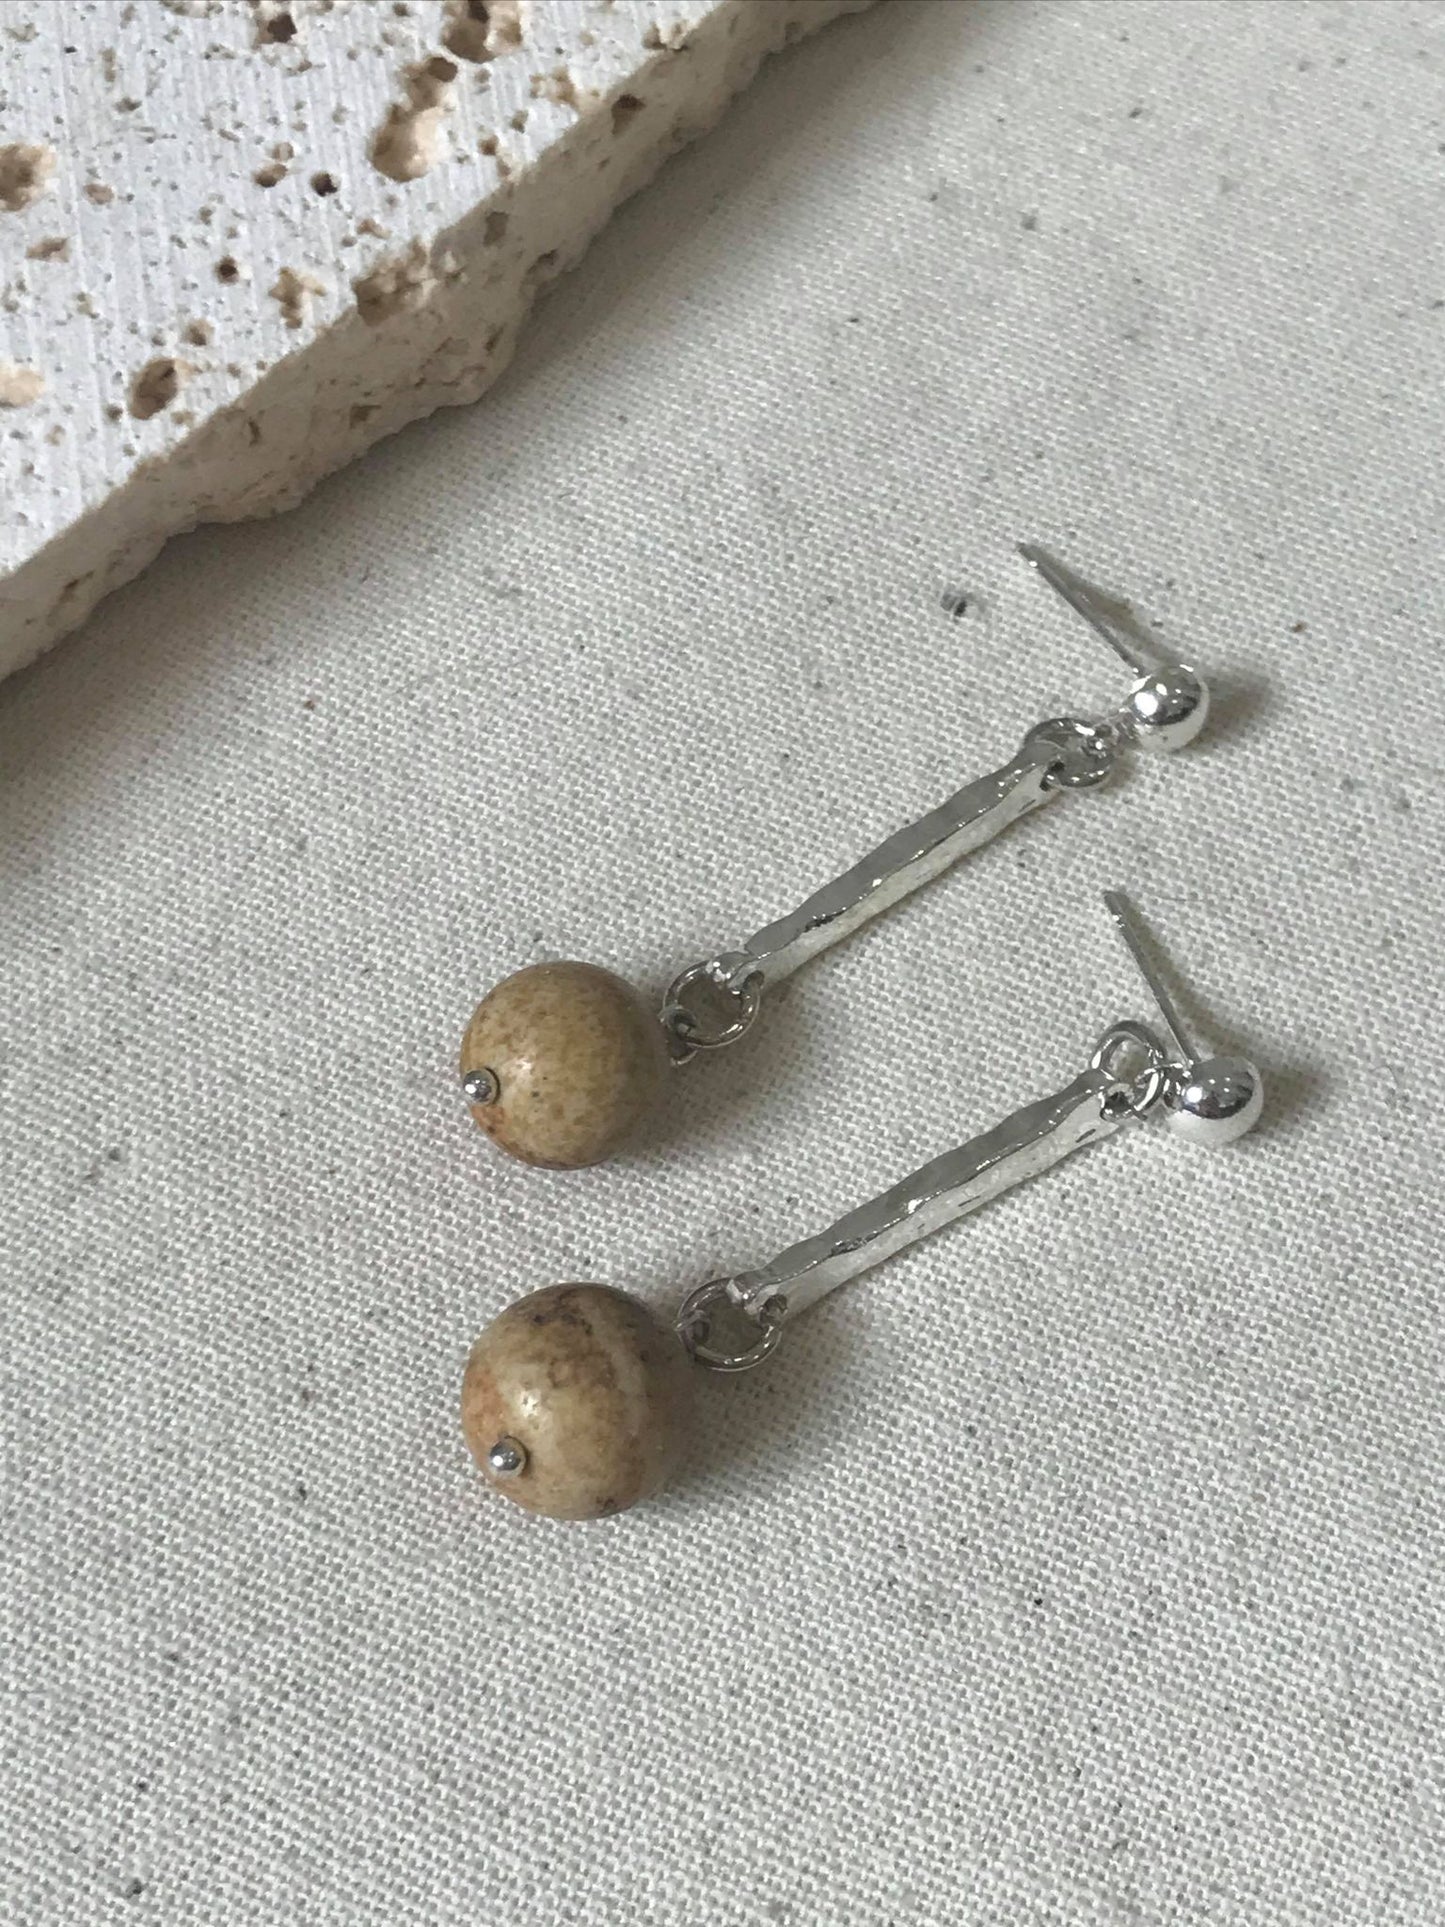 Bead and alloy drop earrings